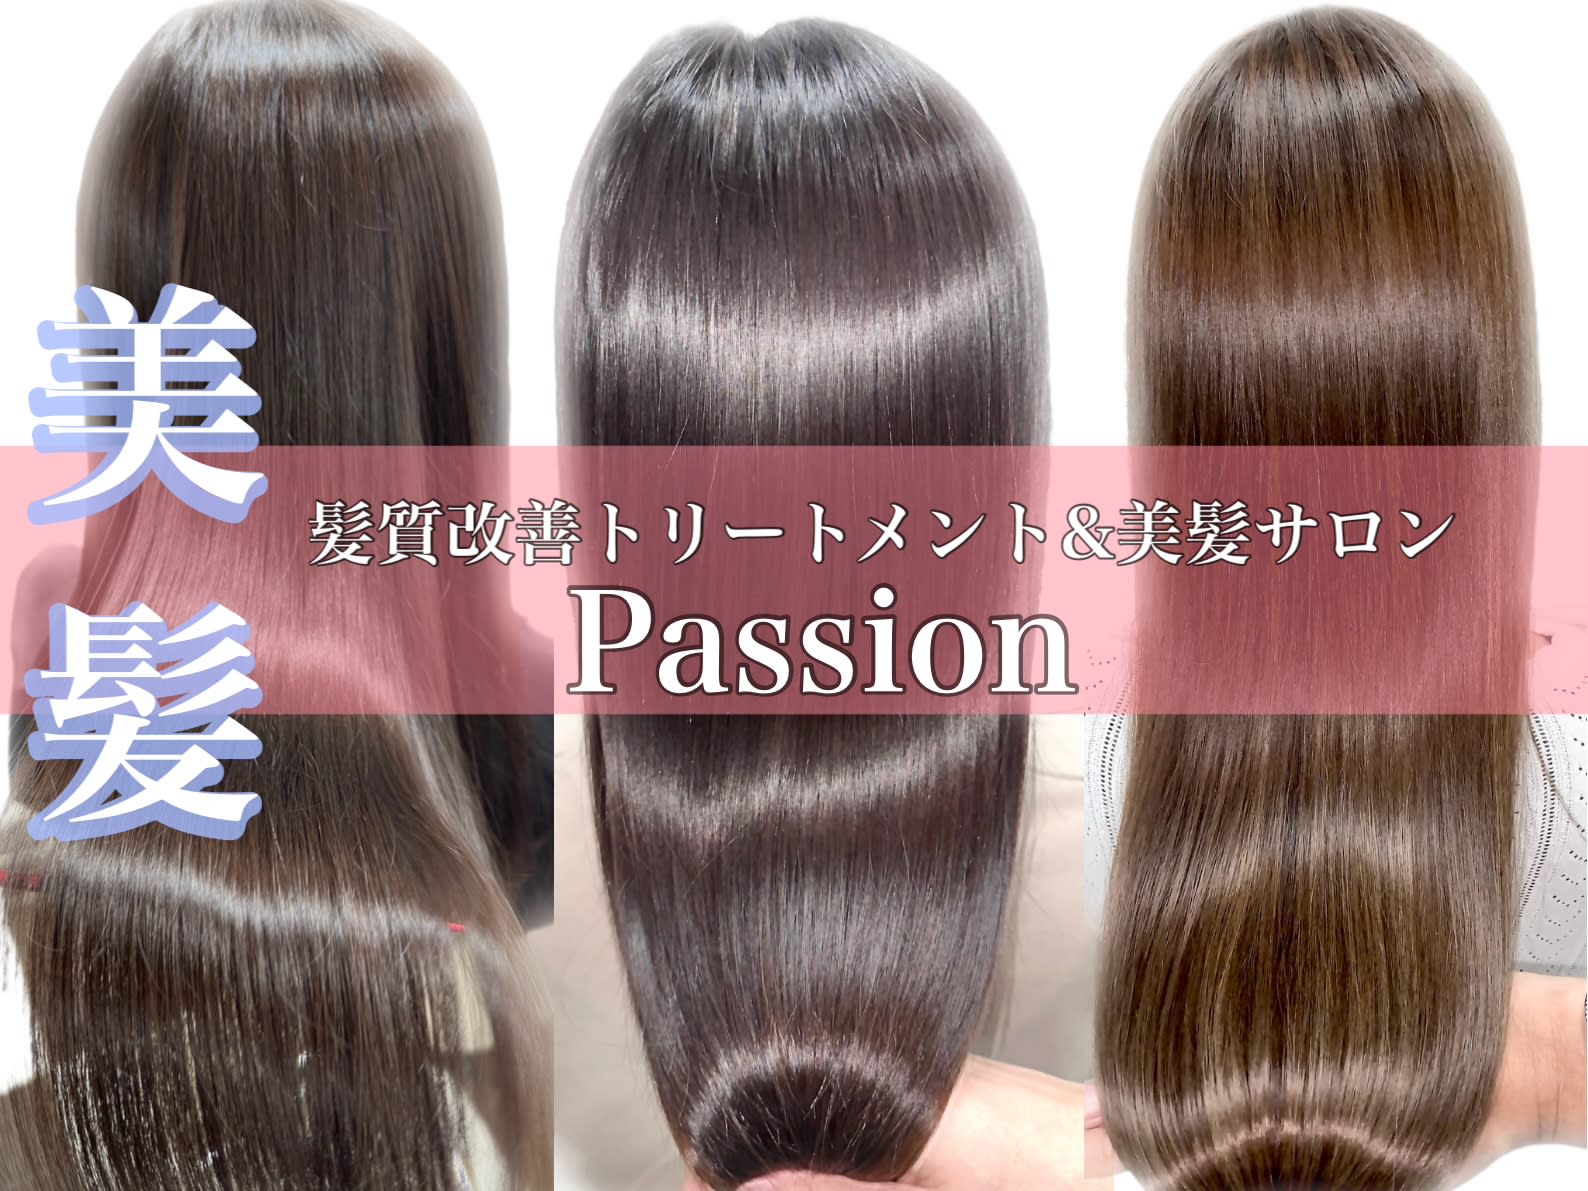 Total Beauty Passion 牧野本店のアイキャッチ画像